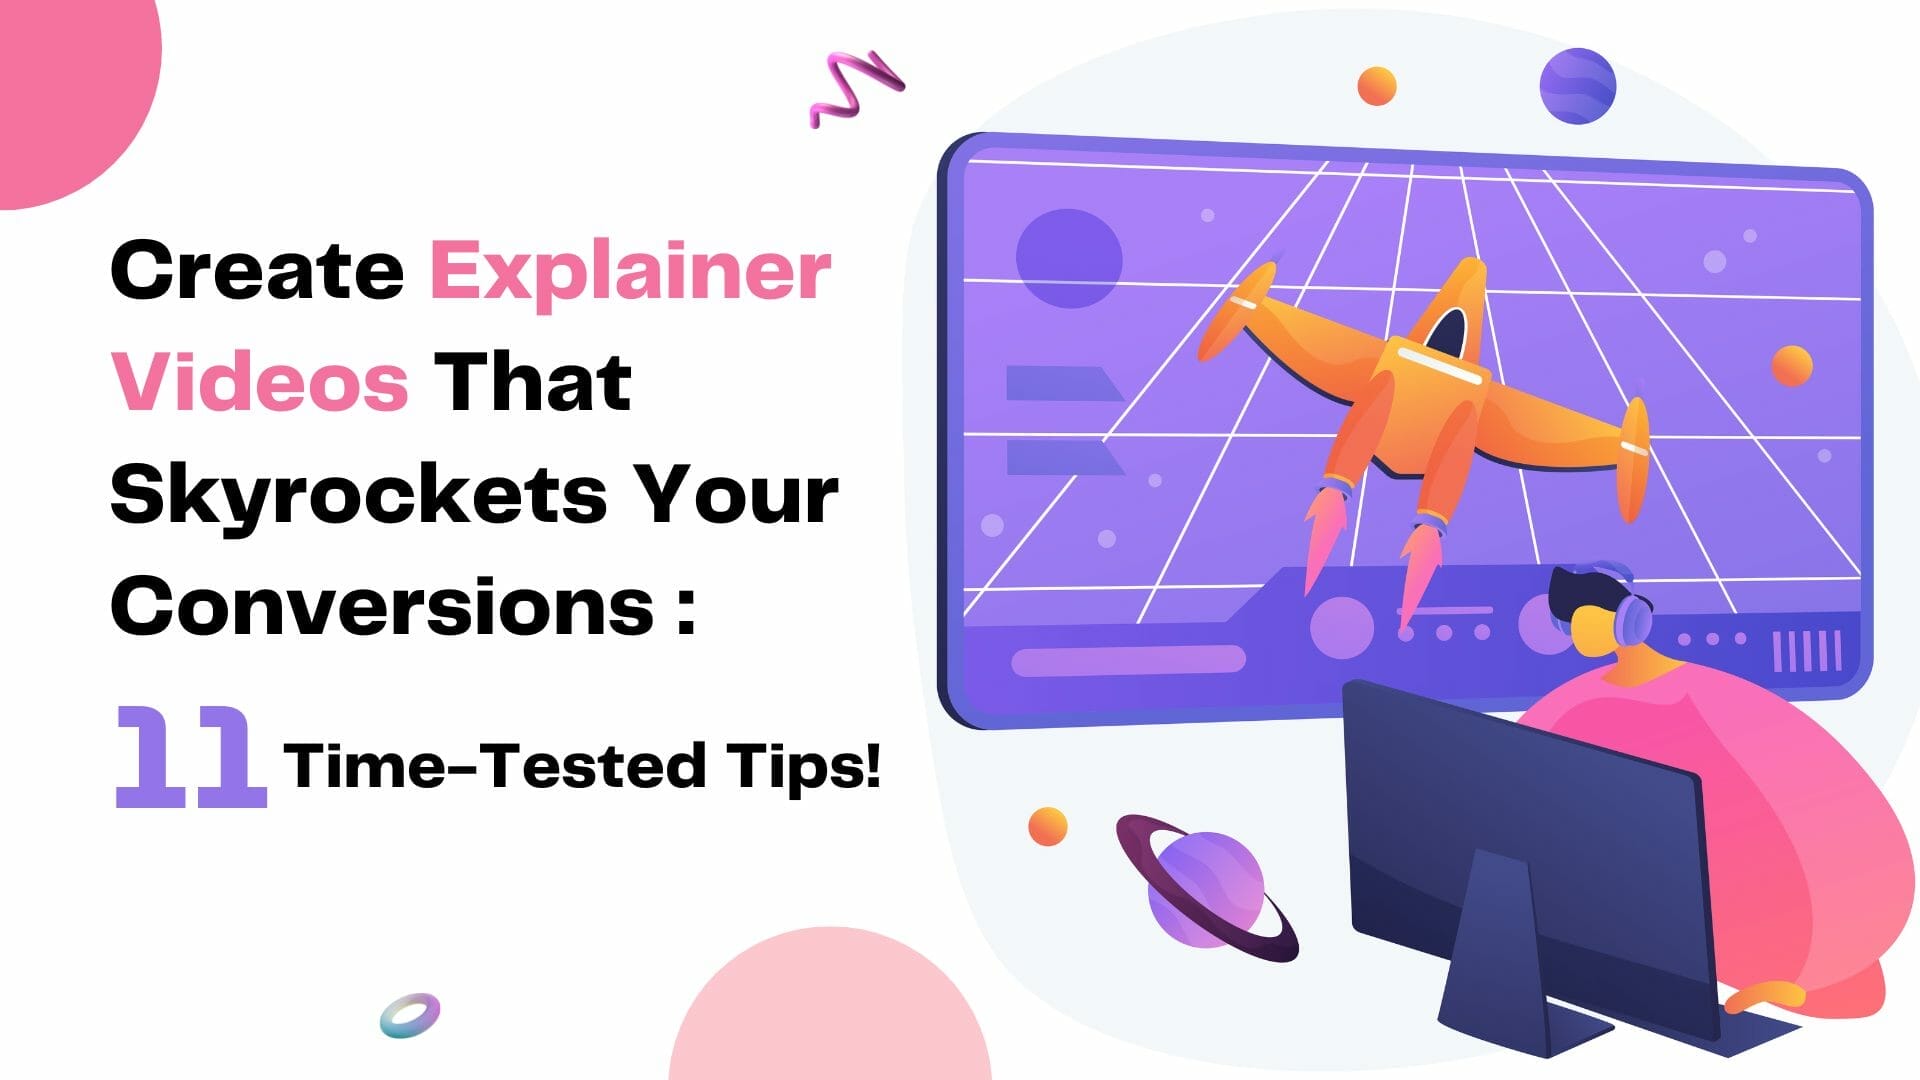 Create Explainer Videos That Skyrockets Your Conversions: 11 Time-Tested Tips!